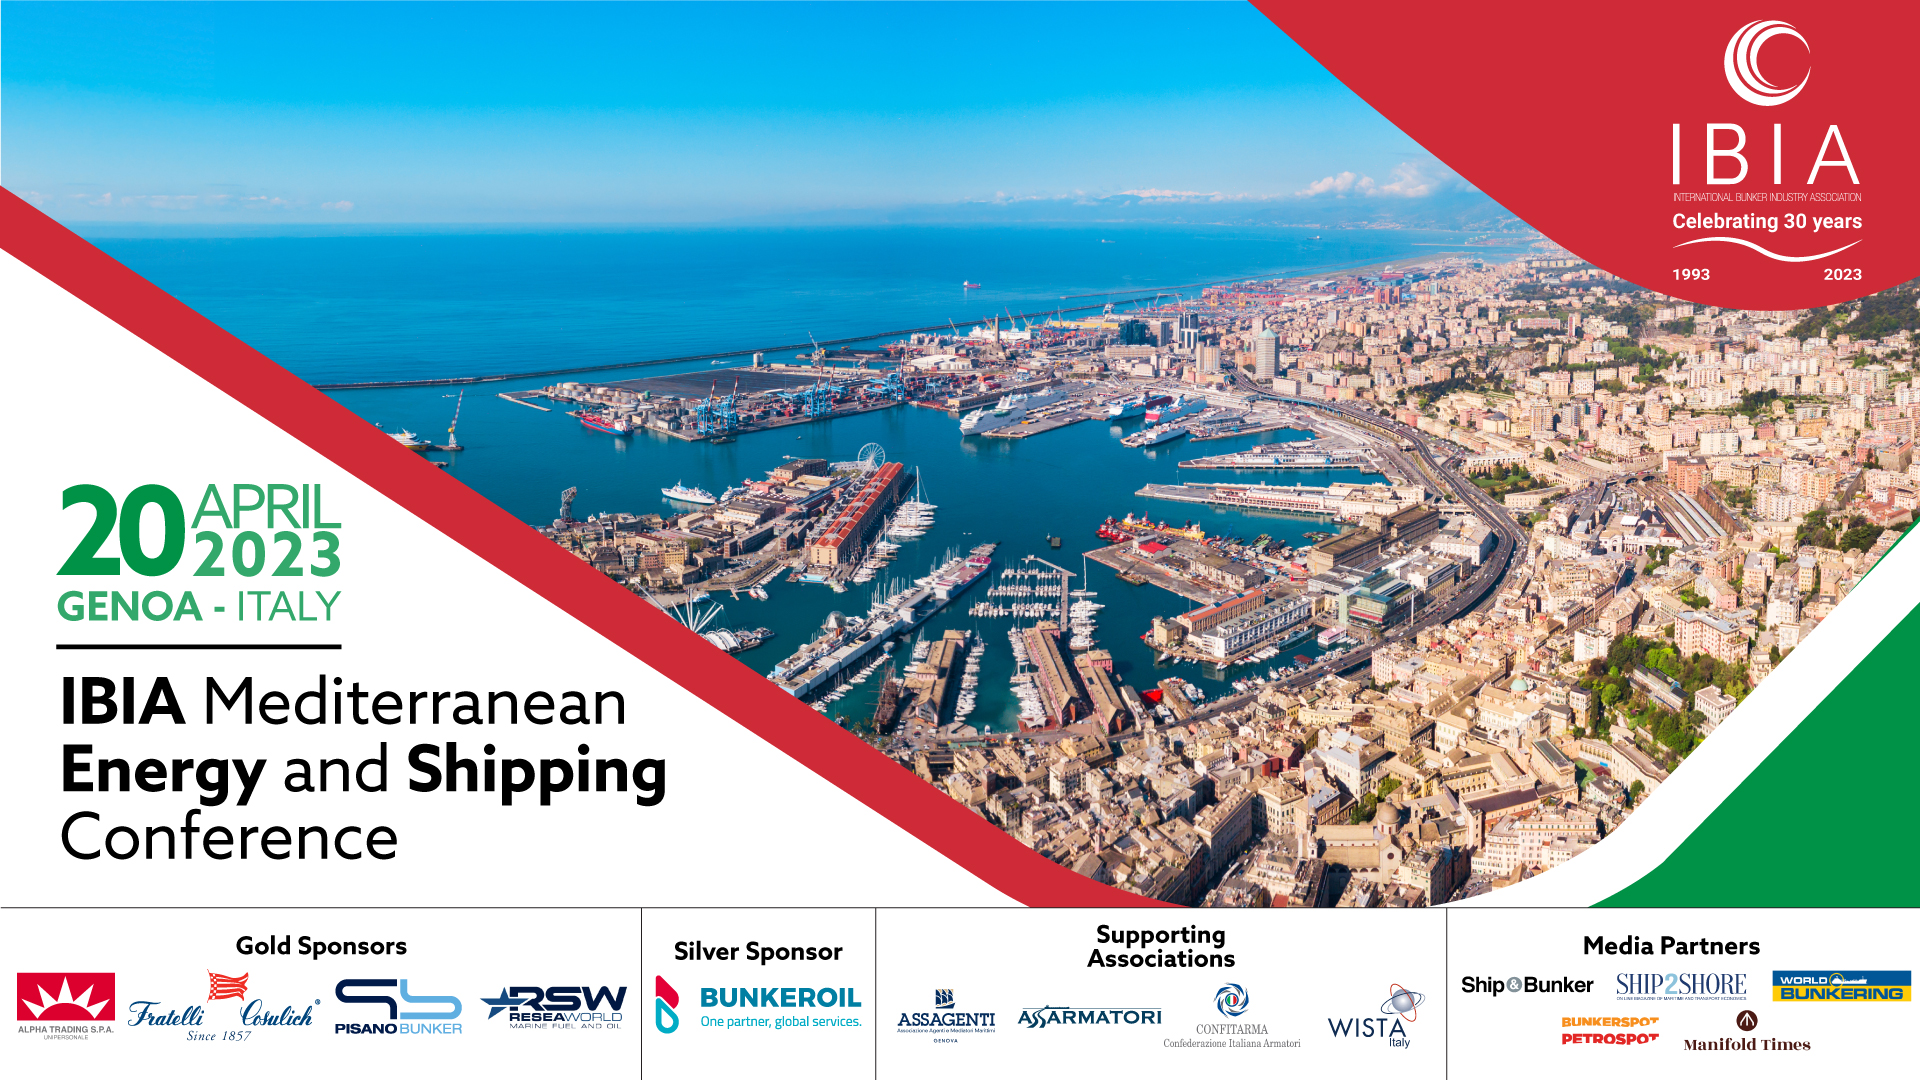 IBIA Mediterranean Energy and Shipping Conference